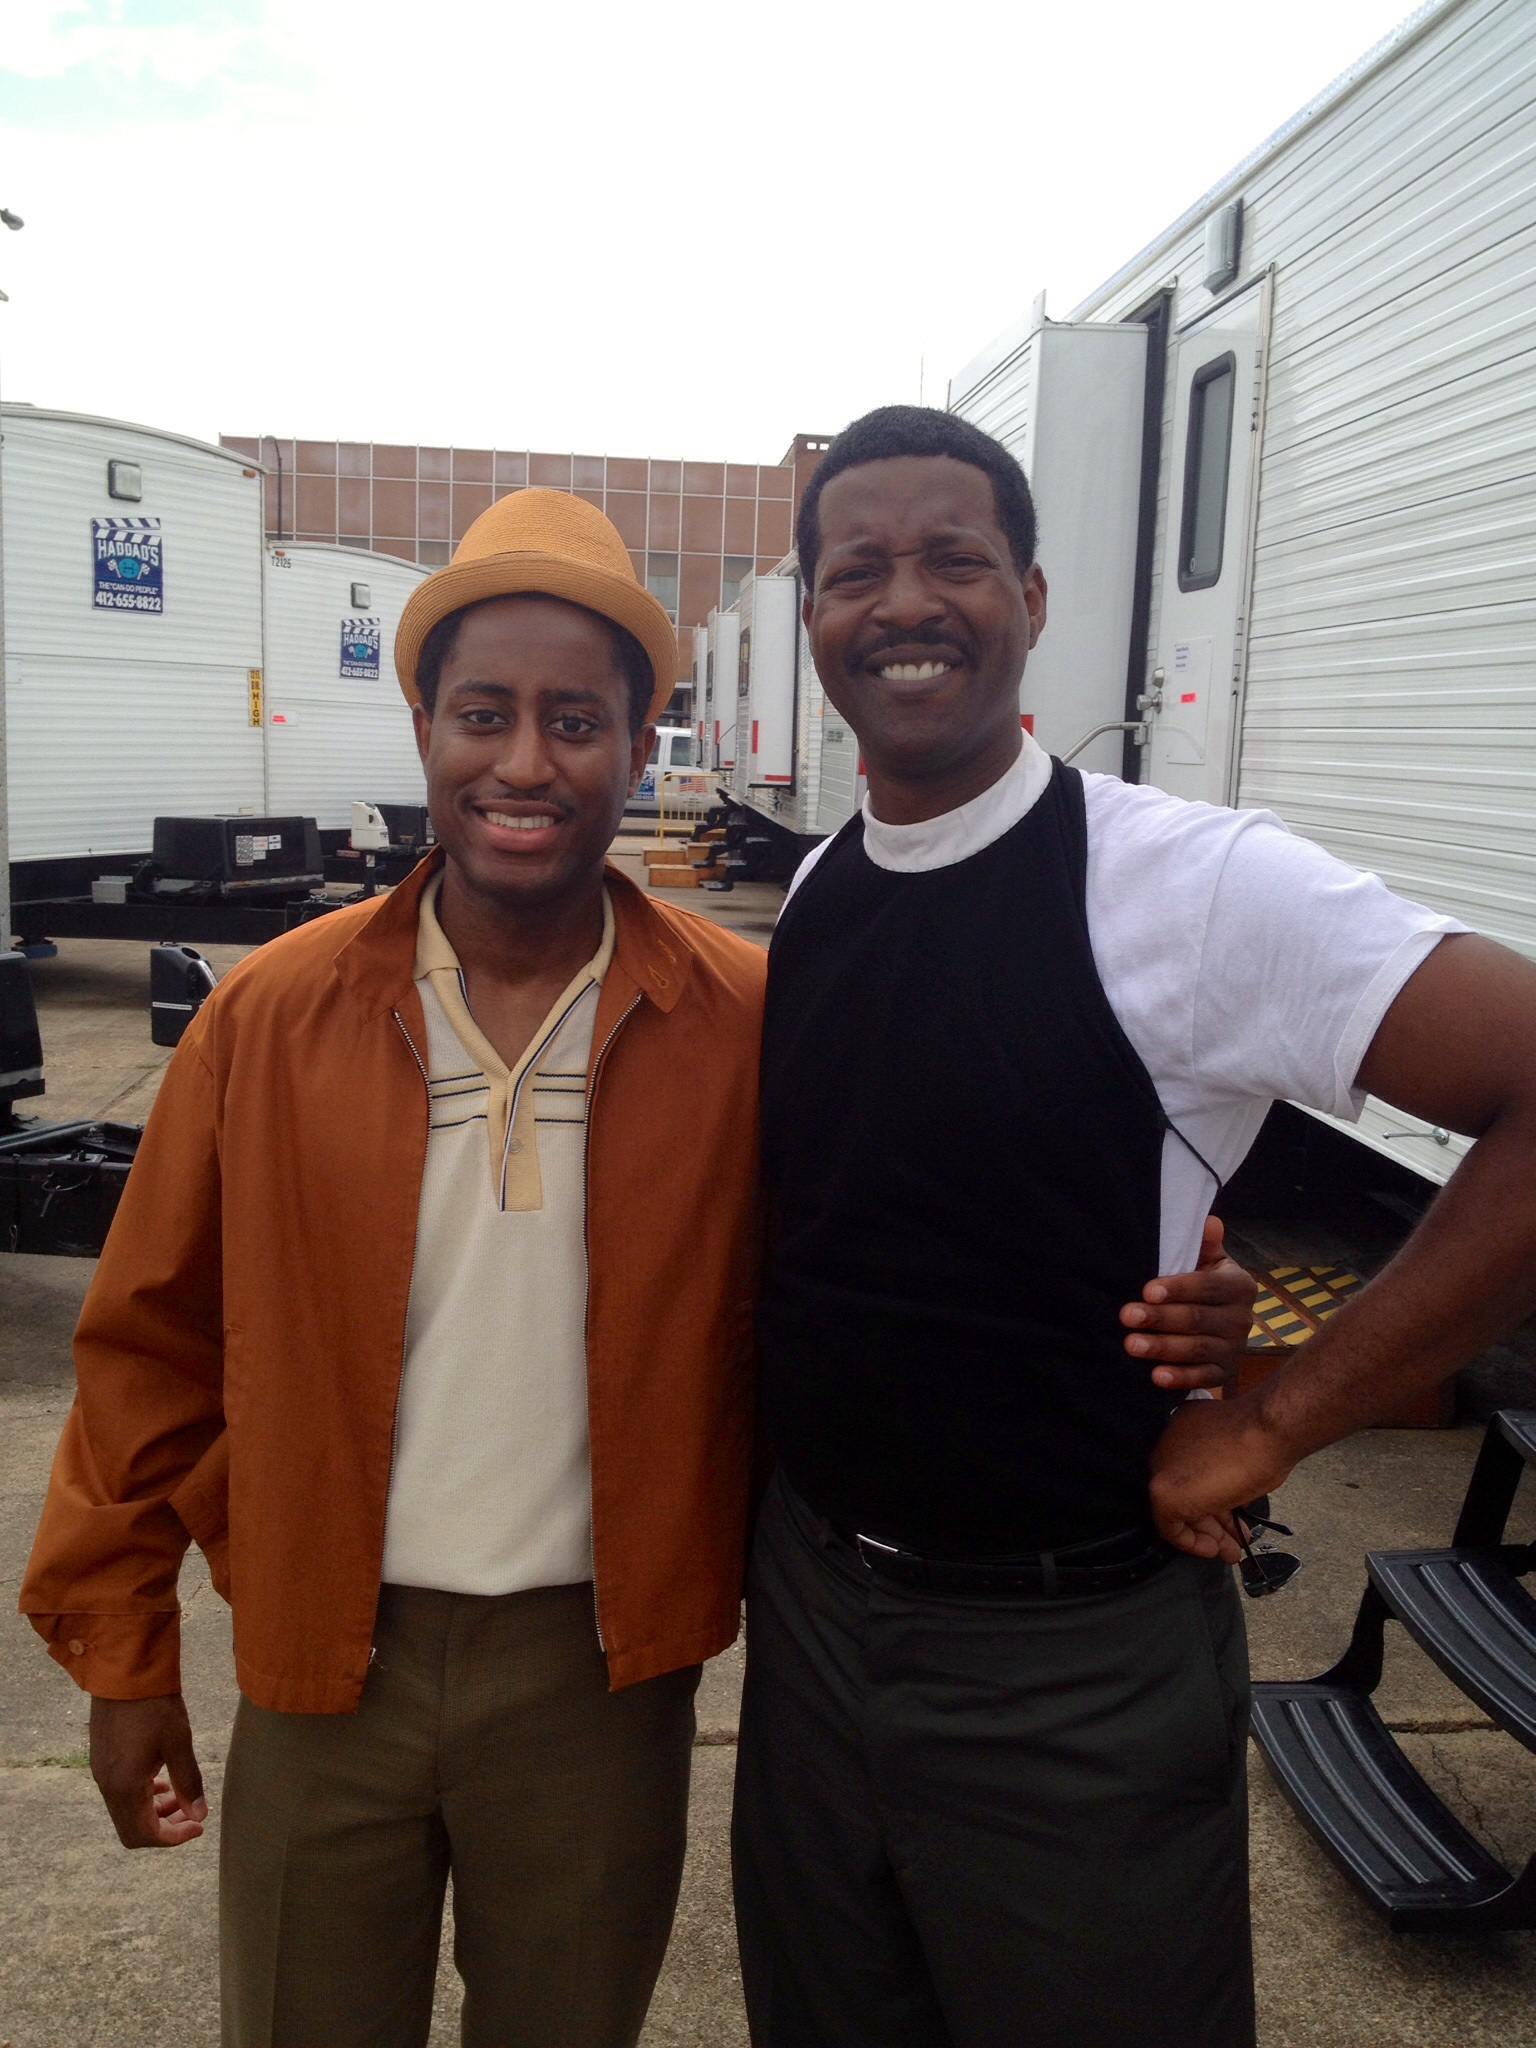 Montrel Miller and Corey Reynolds on the set of Selma